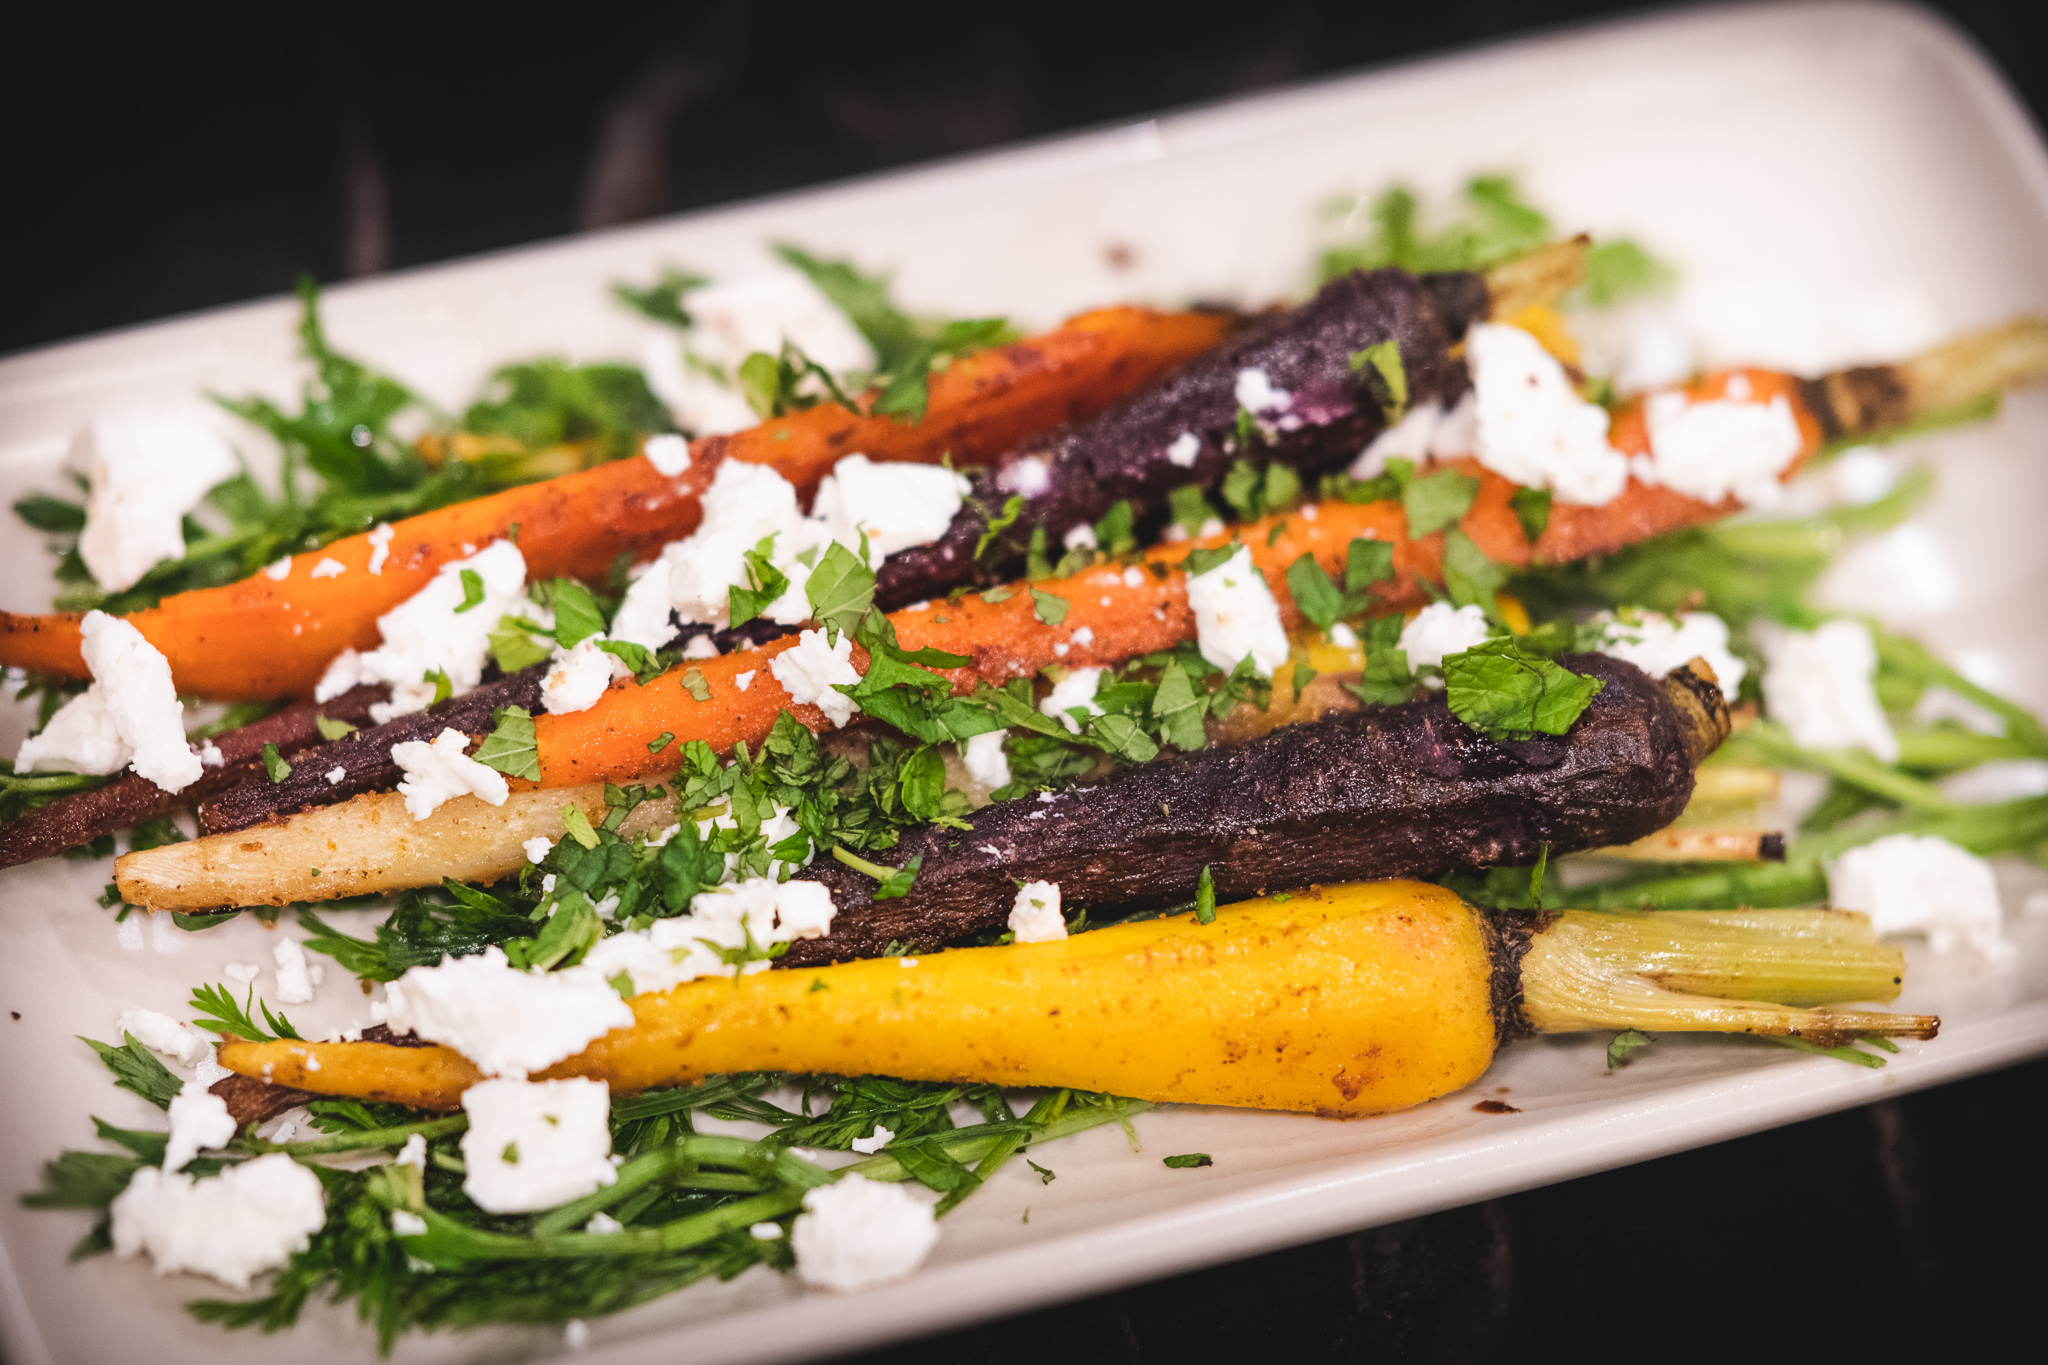 Roasted moroccan carrots featured